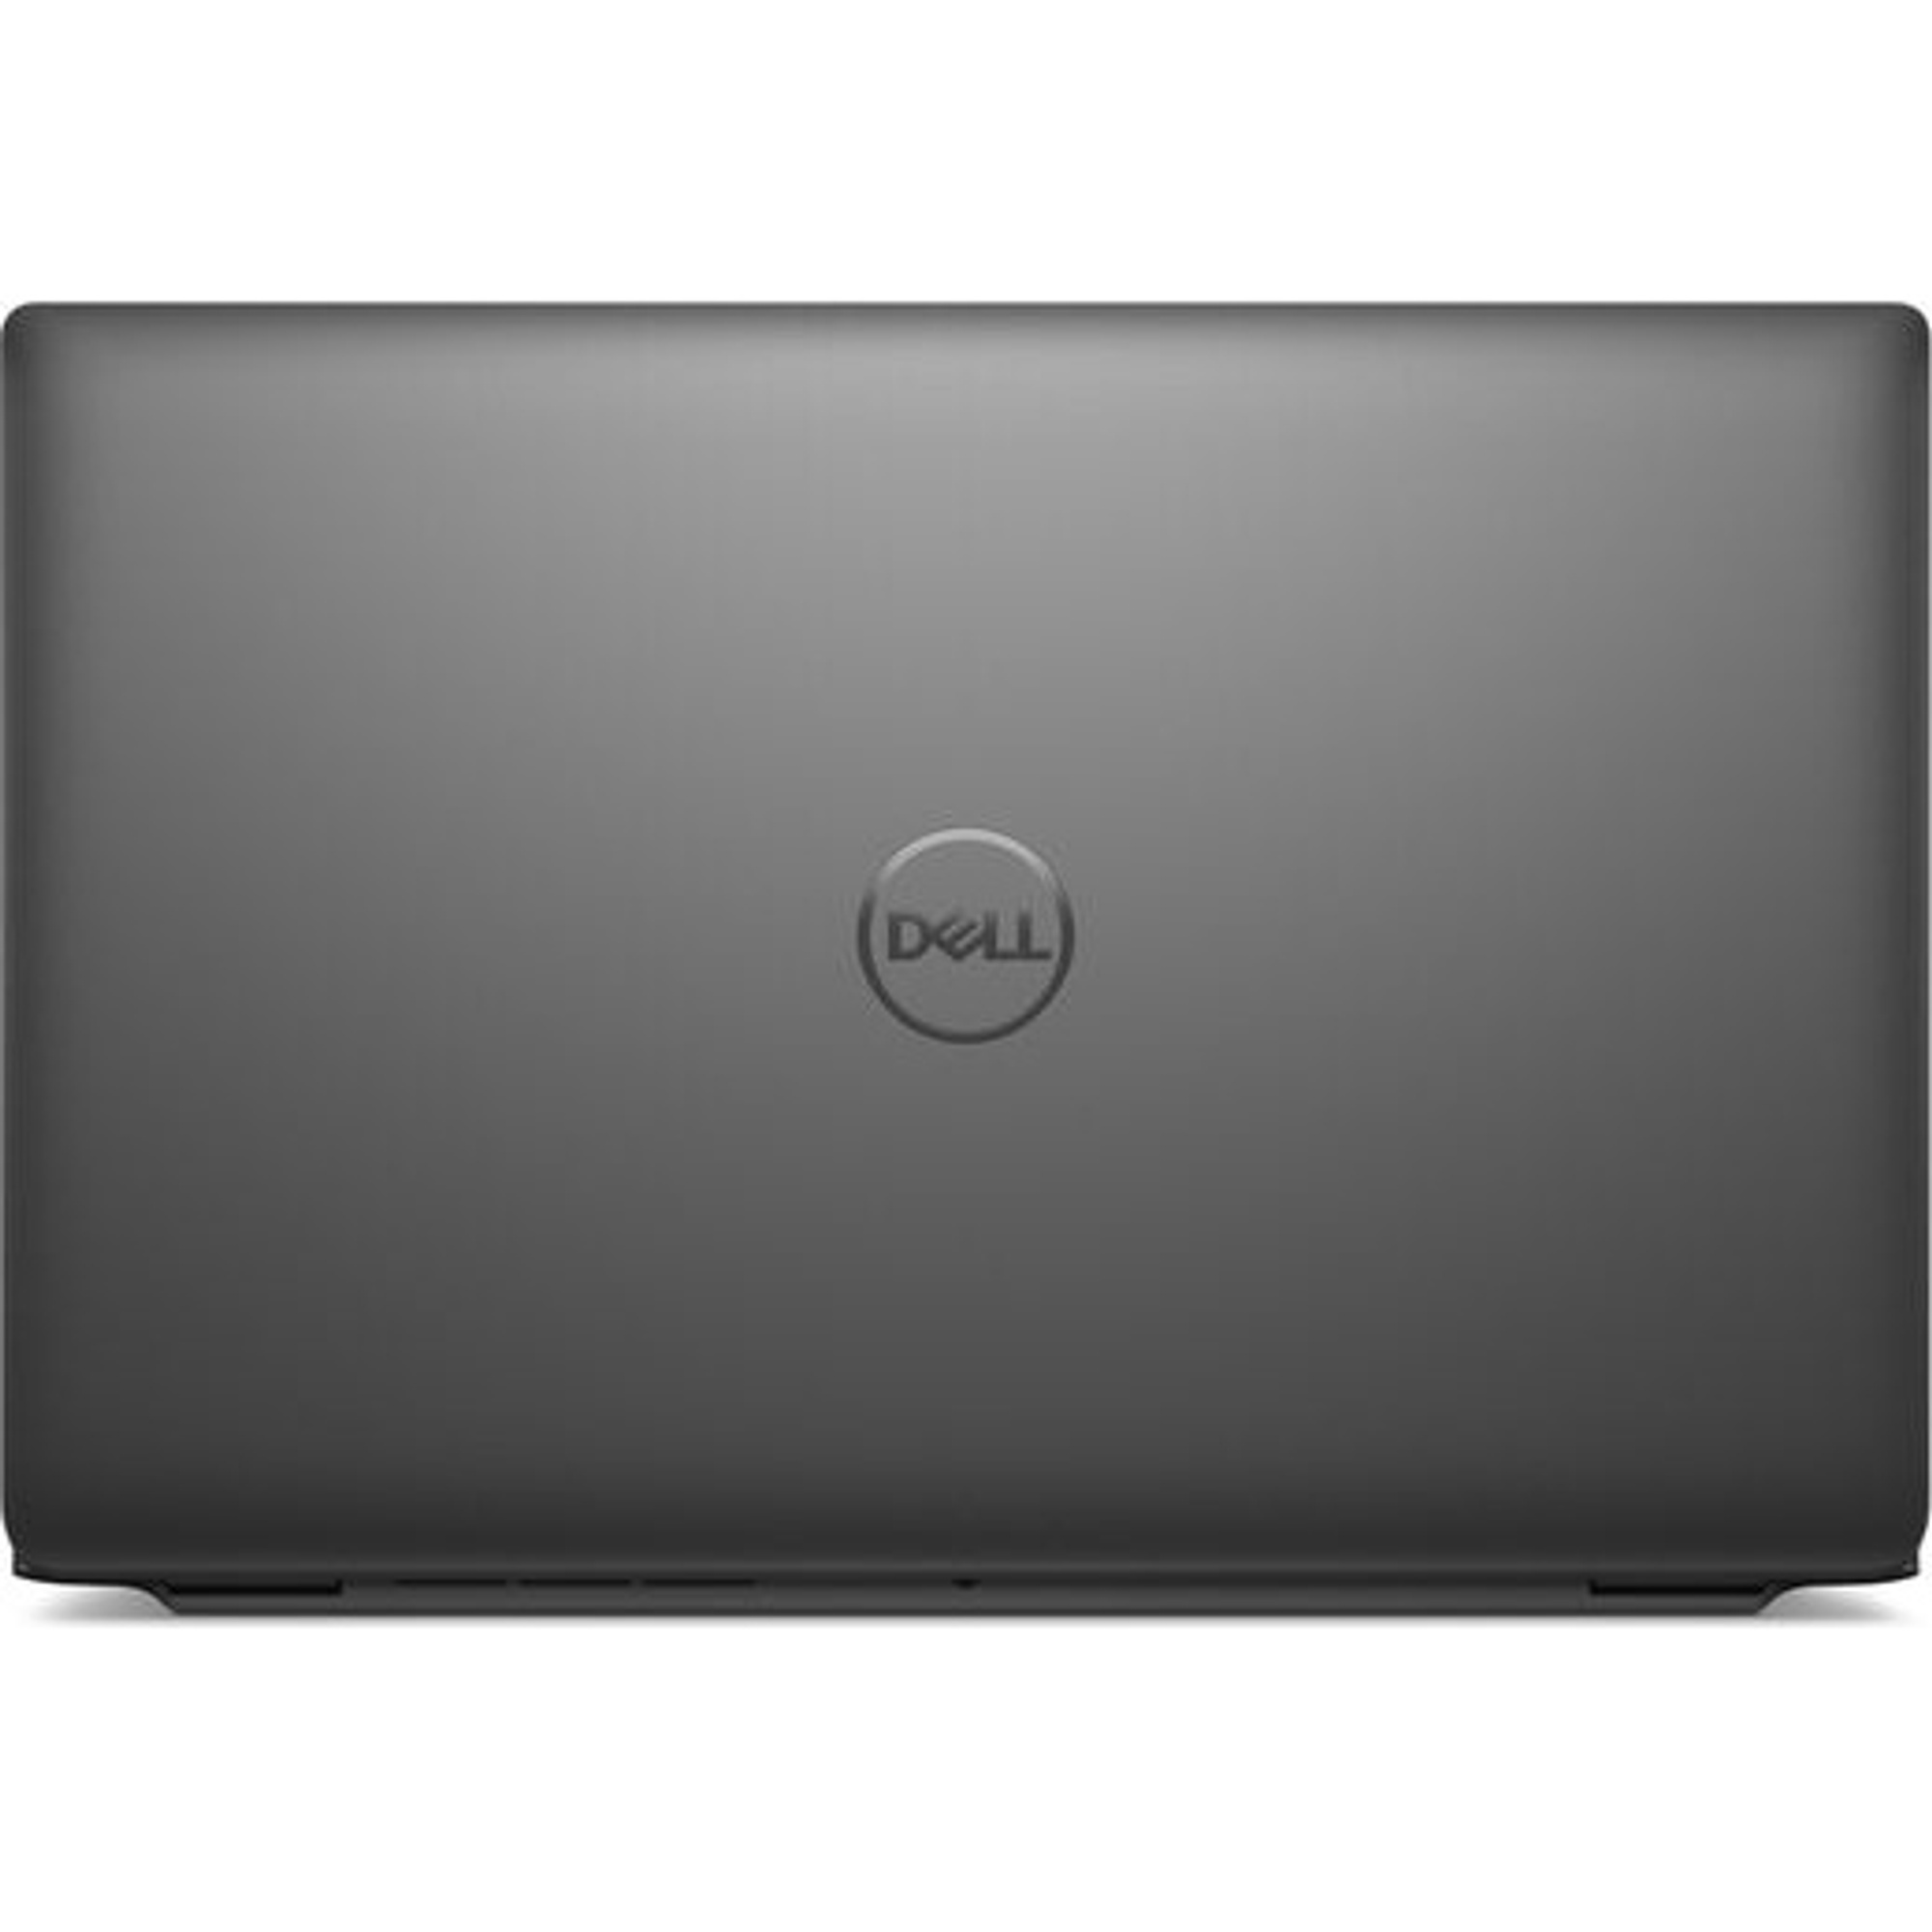 DELL L3540-12 Laptop / Notebook 7